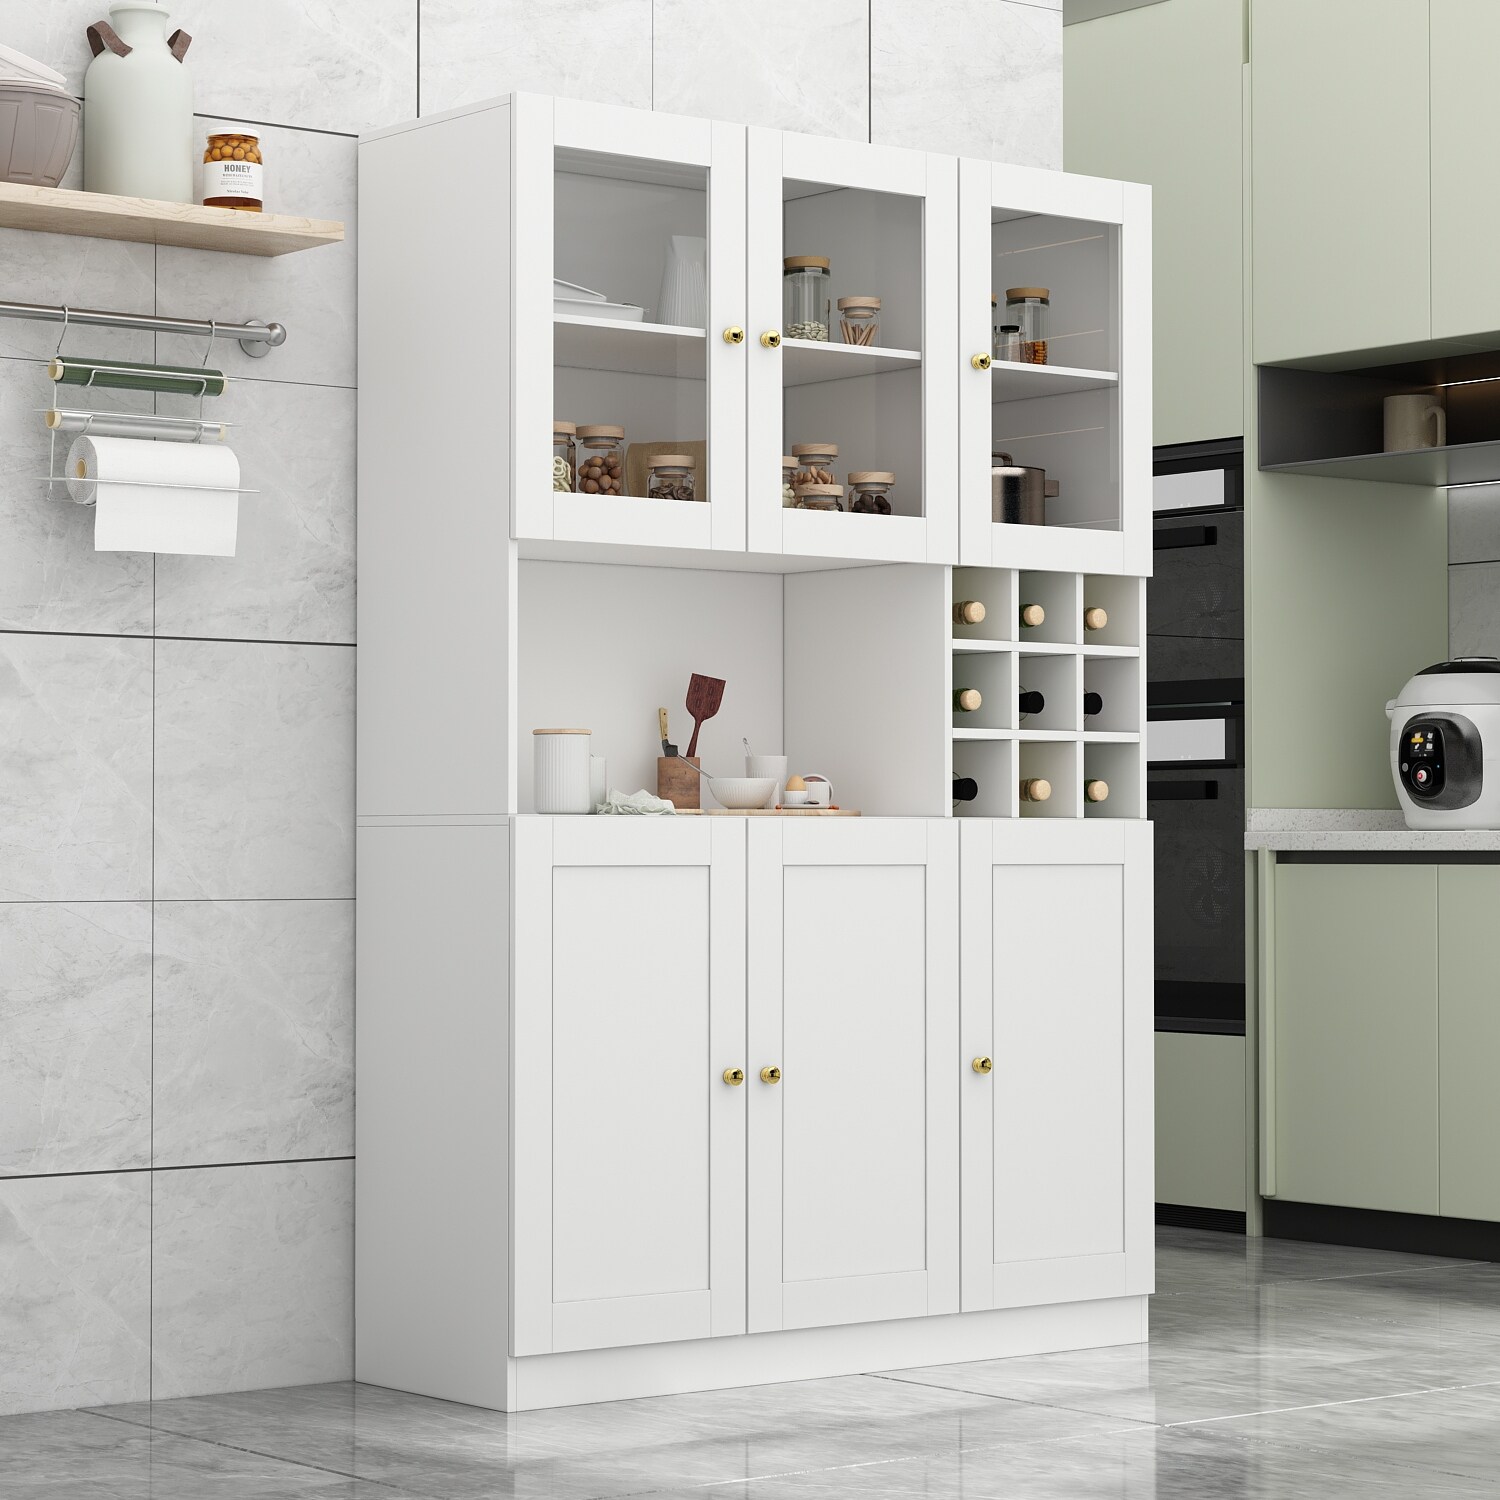 https://ak1.ostkcdn.com/images/products/is/images/direct/a592daa91b0b1f86f38ad195c5137ddc3fe0ff61/47.2%22X70.9%22-Kitchen-Pantry-Storage-Cabinet-Acrylic-Glass-Wine-Cabinet.jpg